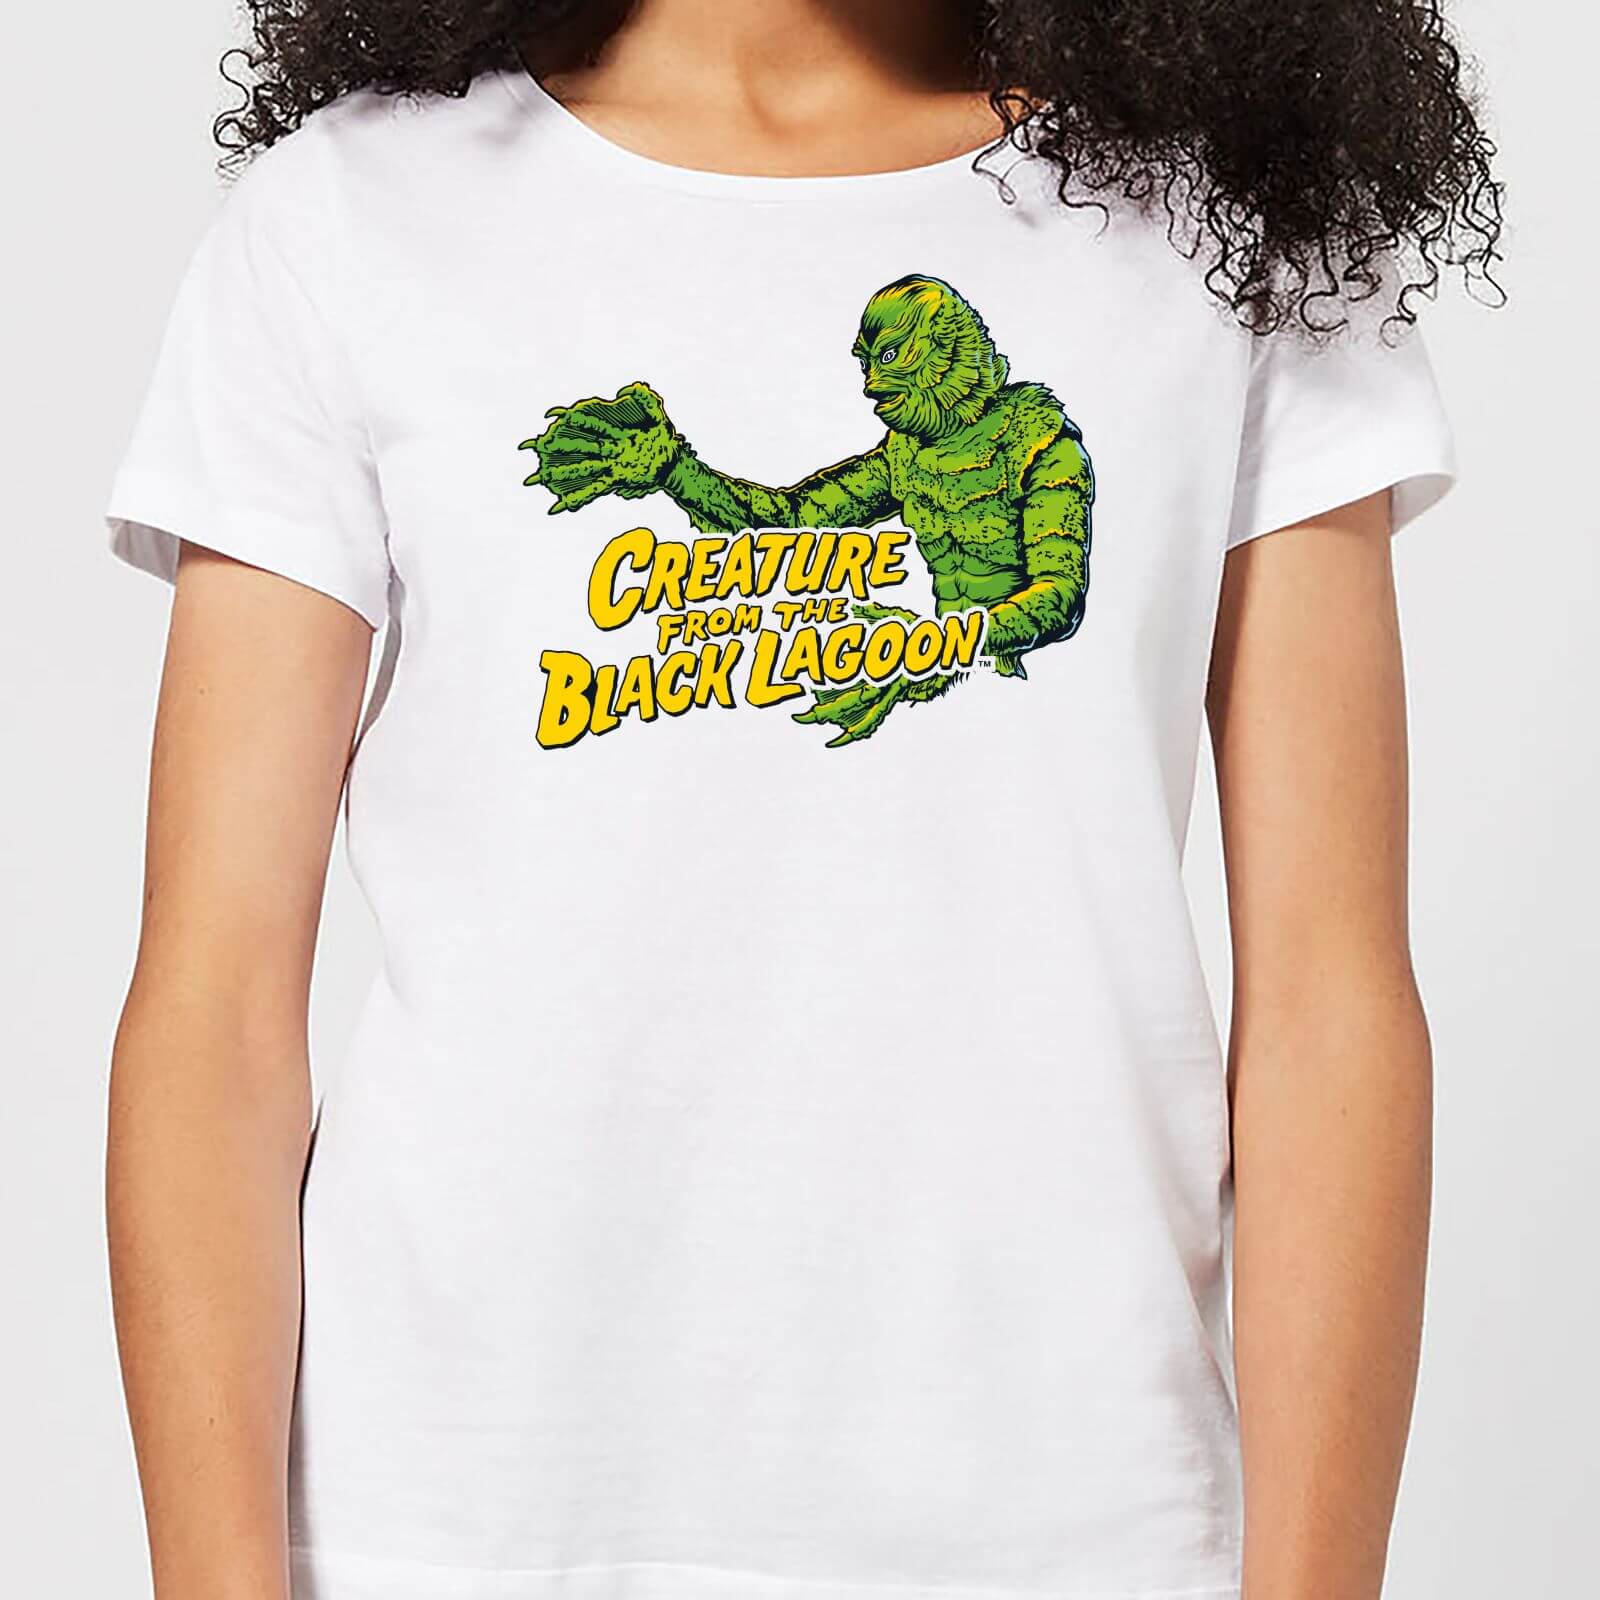 Universal Monsters Creature From The Black Lagoon Crest Women's T-Shirt - White - 4XL - White